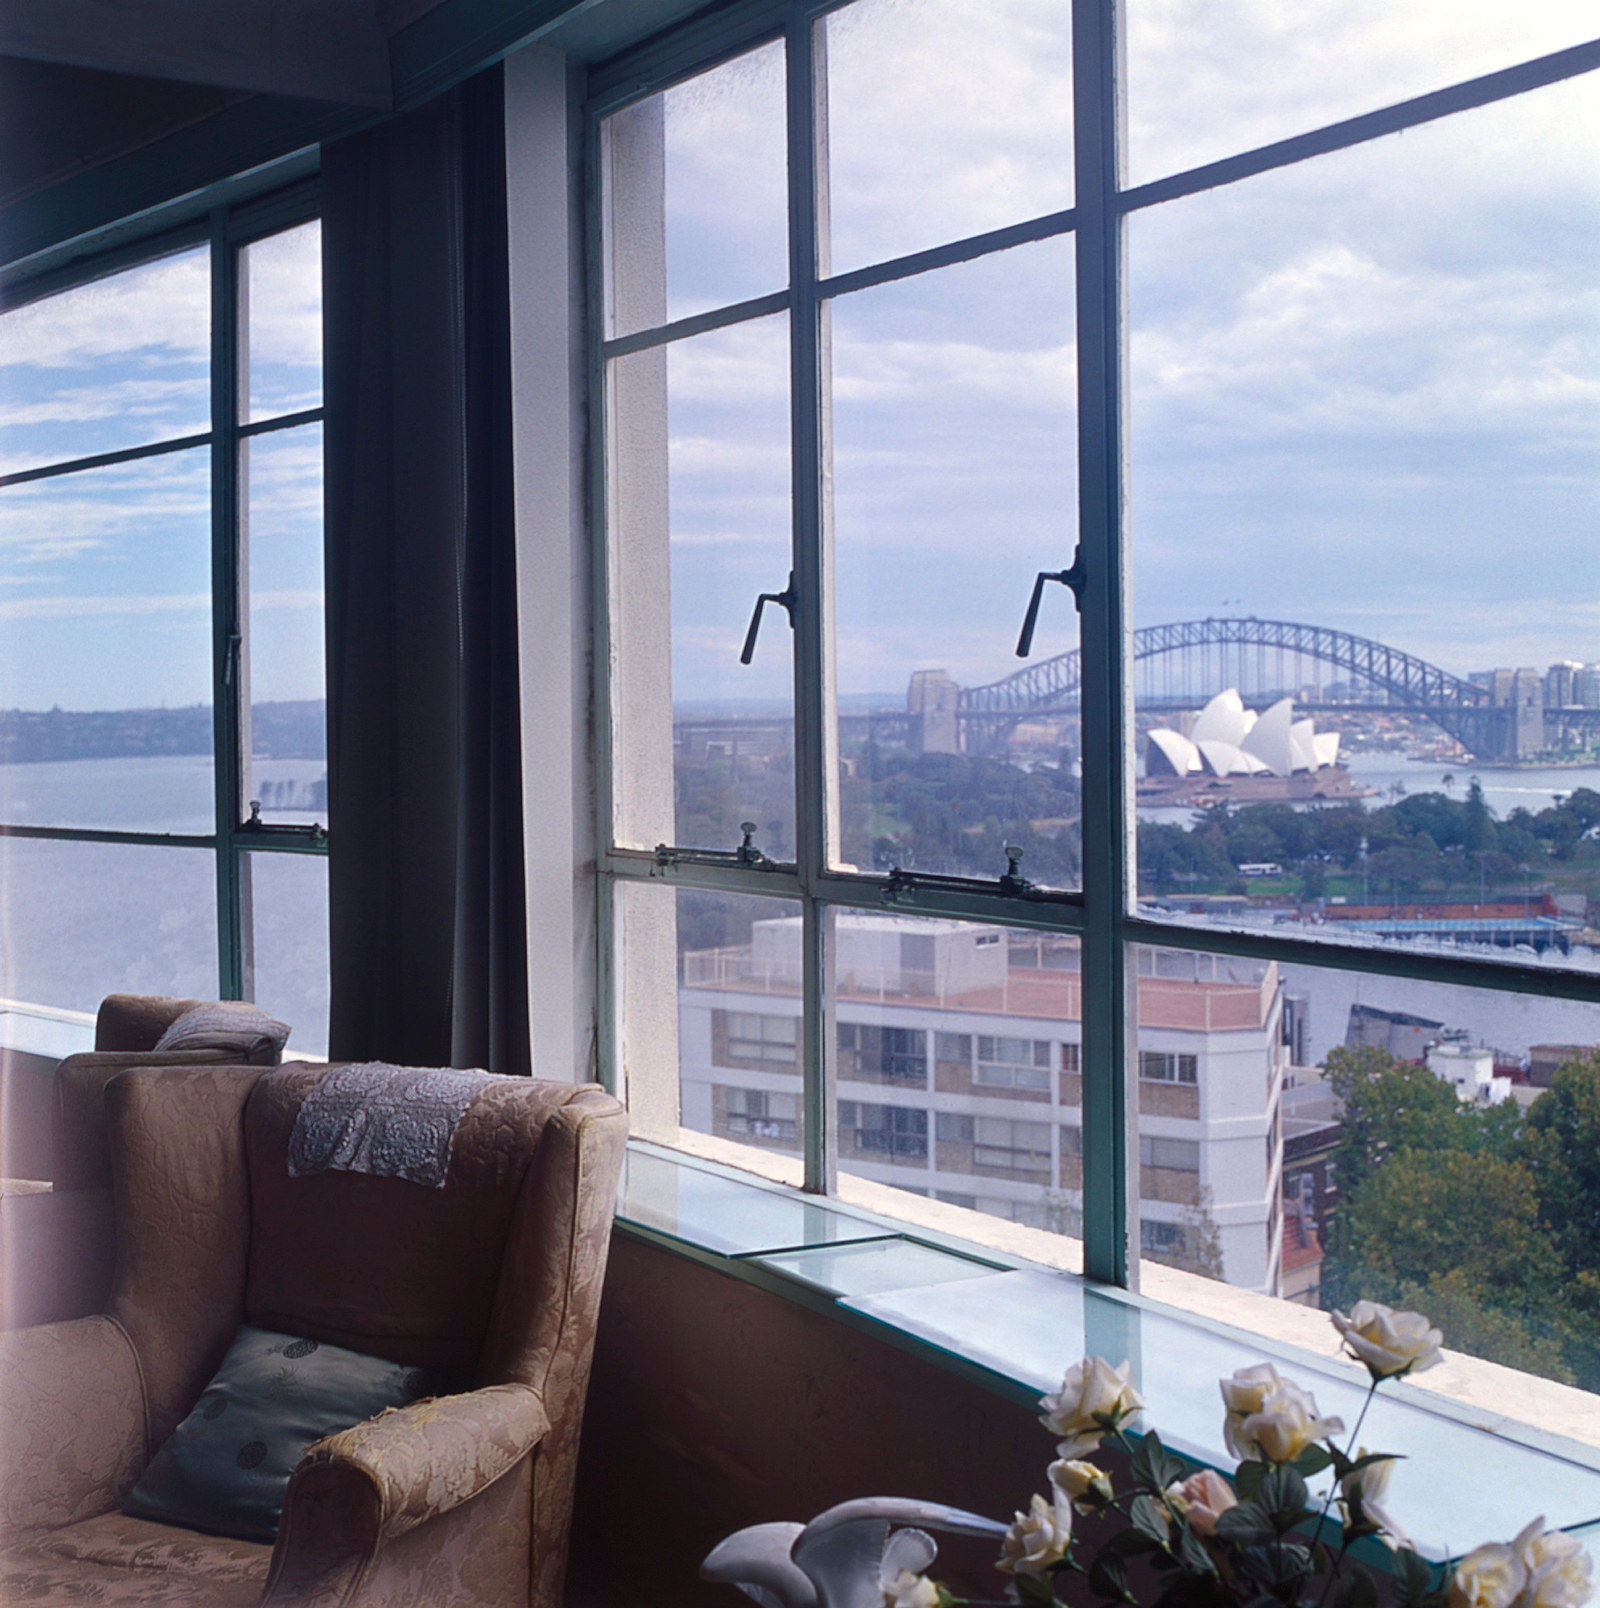 Wylde Street, Potts Point - the penthouse apartment